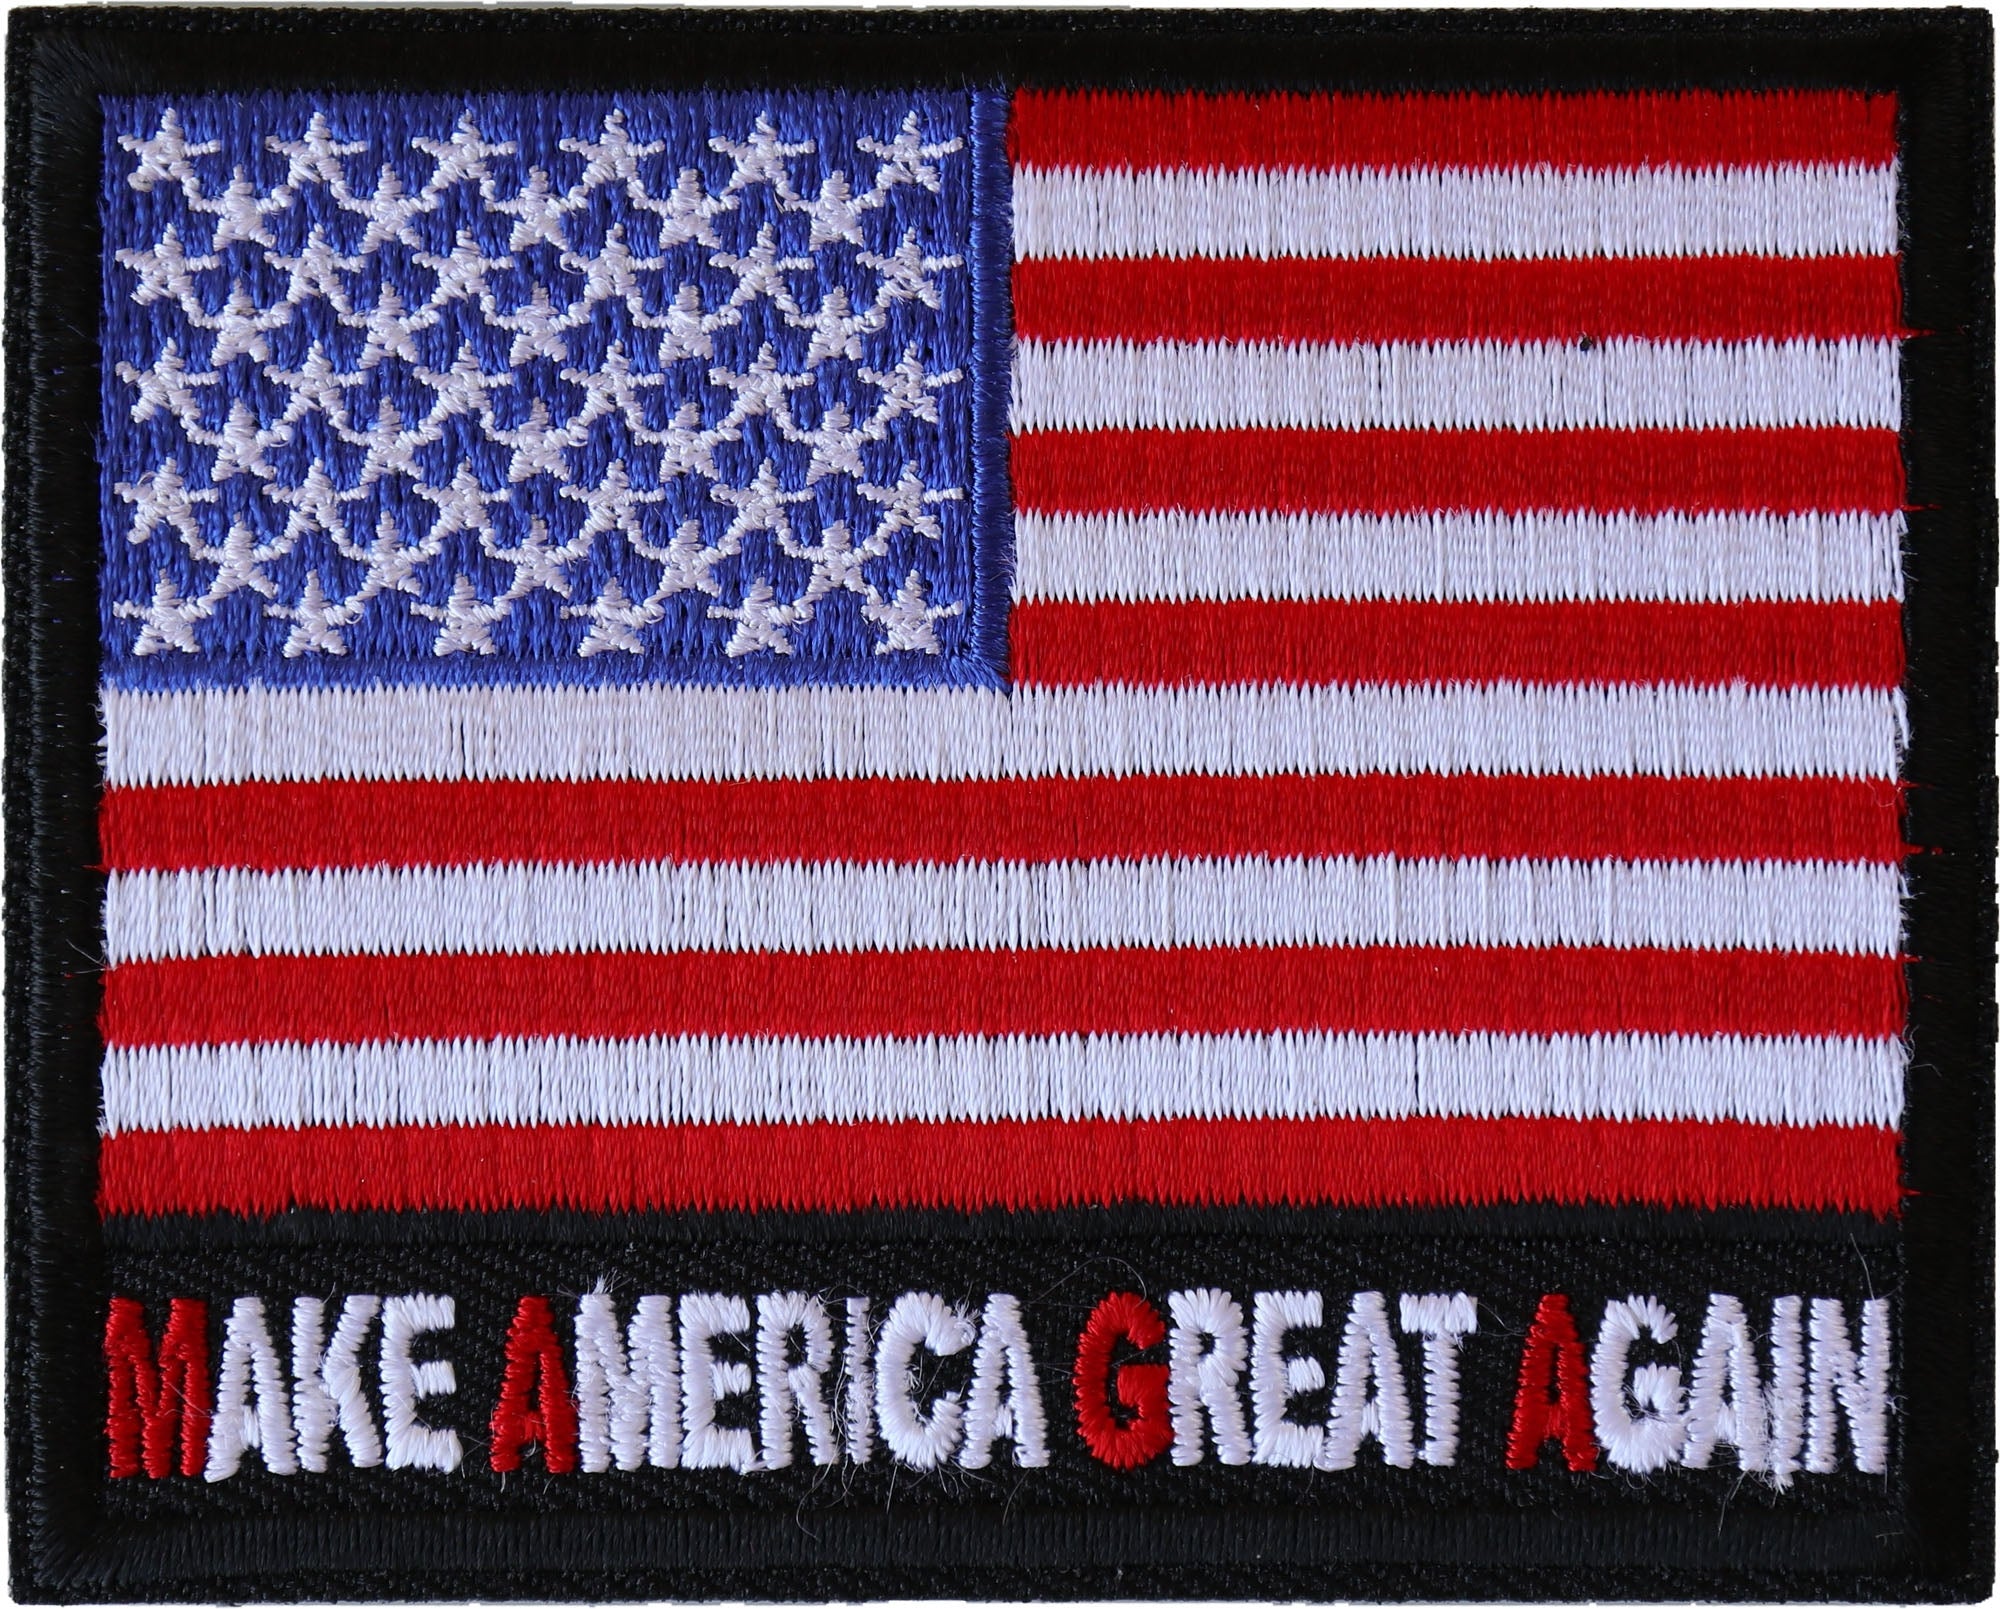 Make American Great Again US Flag Patch measures 2.5 x 3 inches